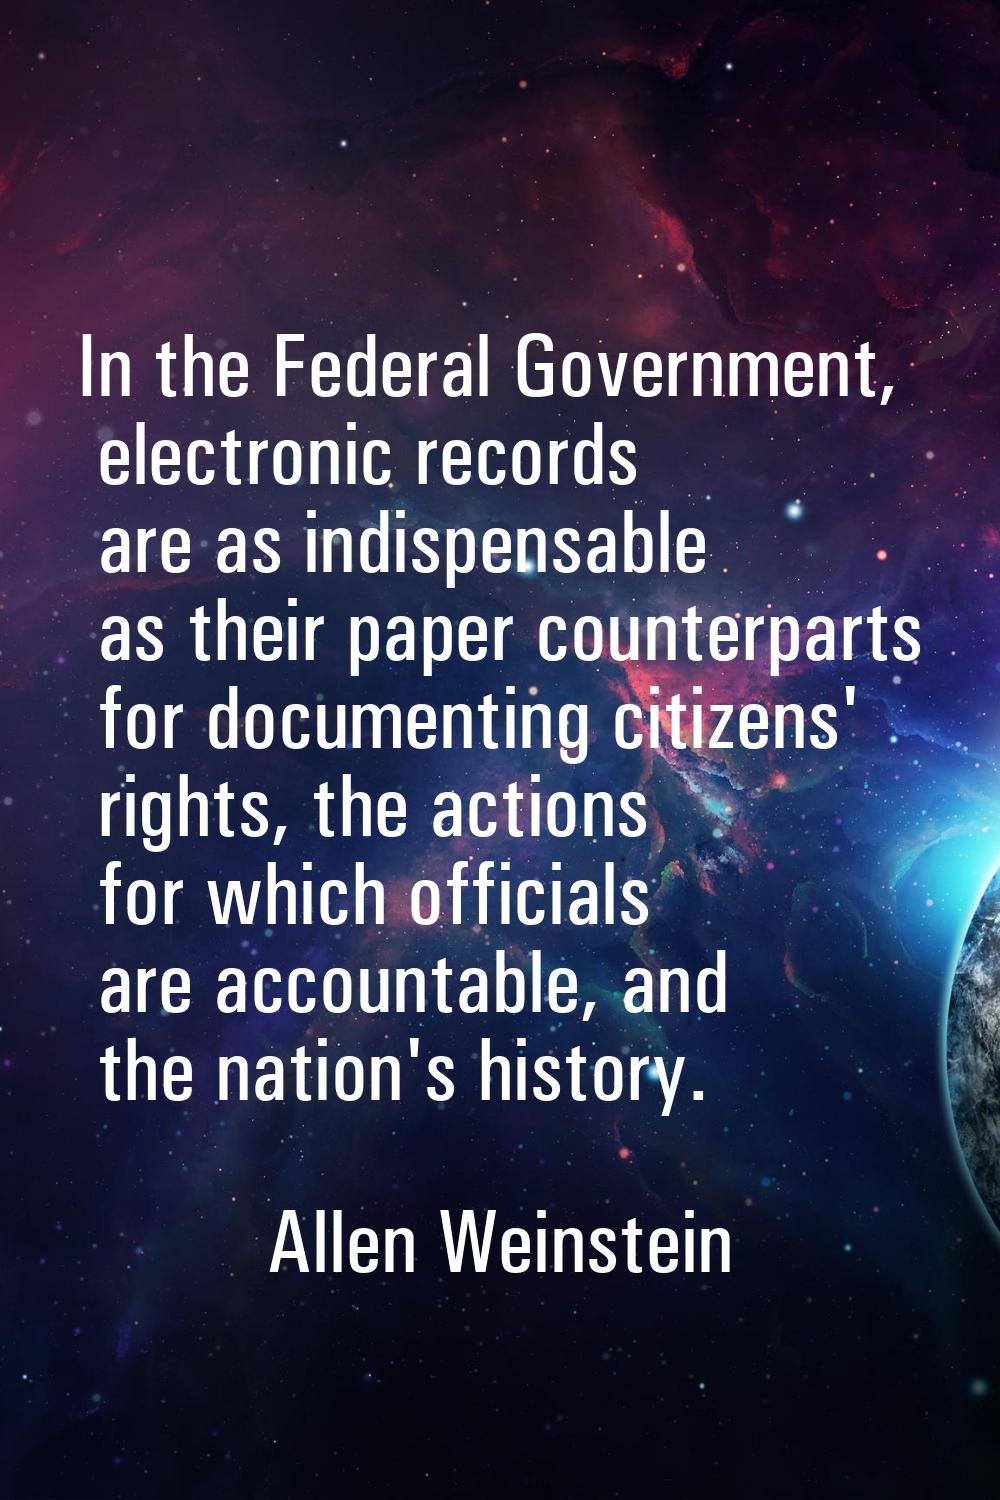 In the Federal Government, electronic records are as indispensable as their paper counterparts for 